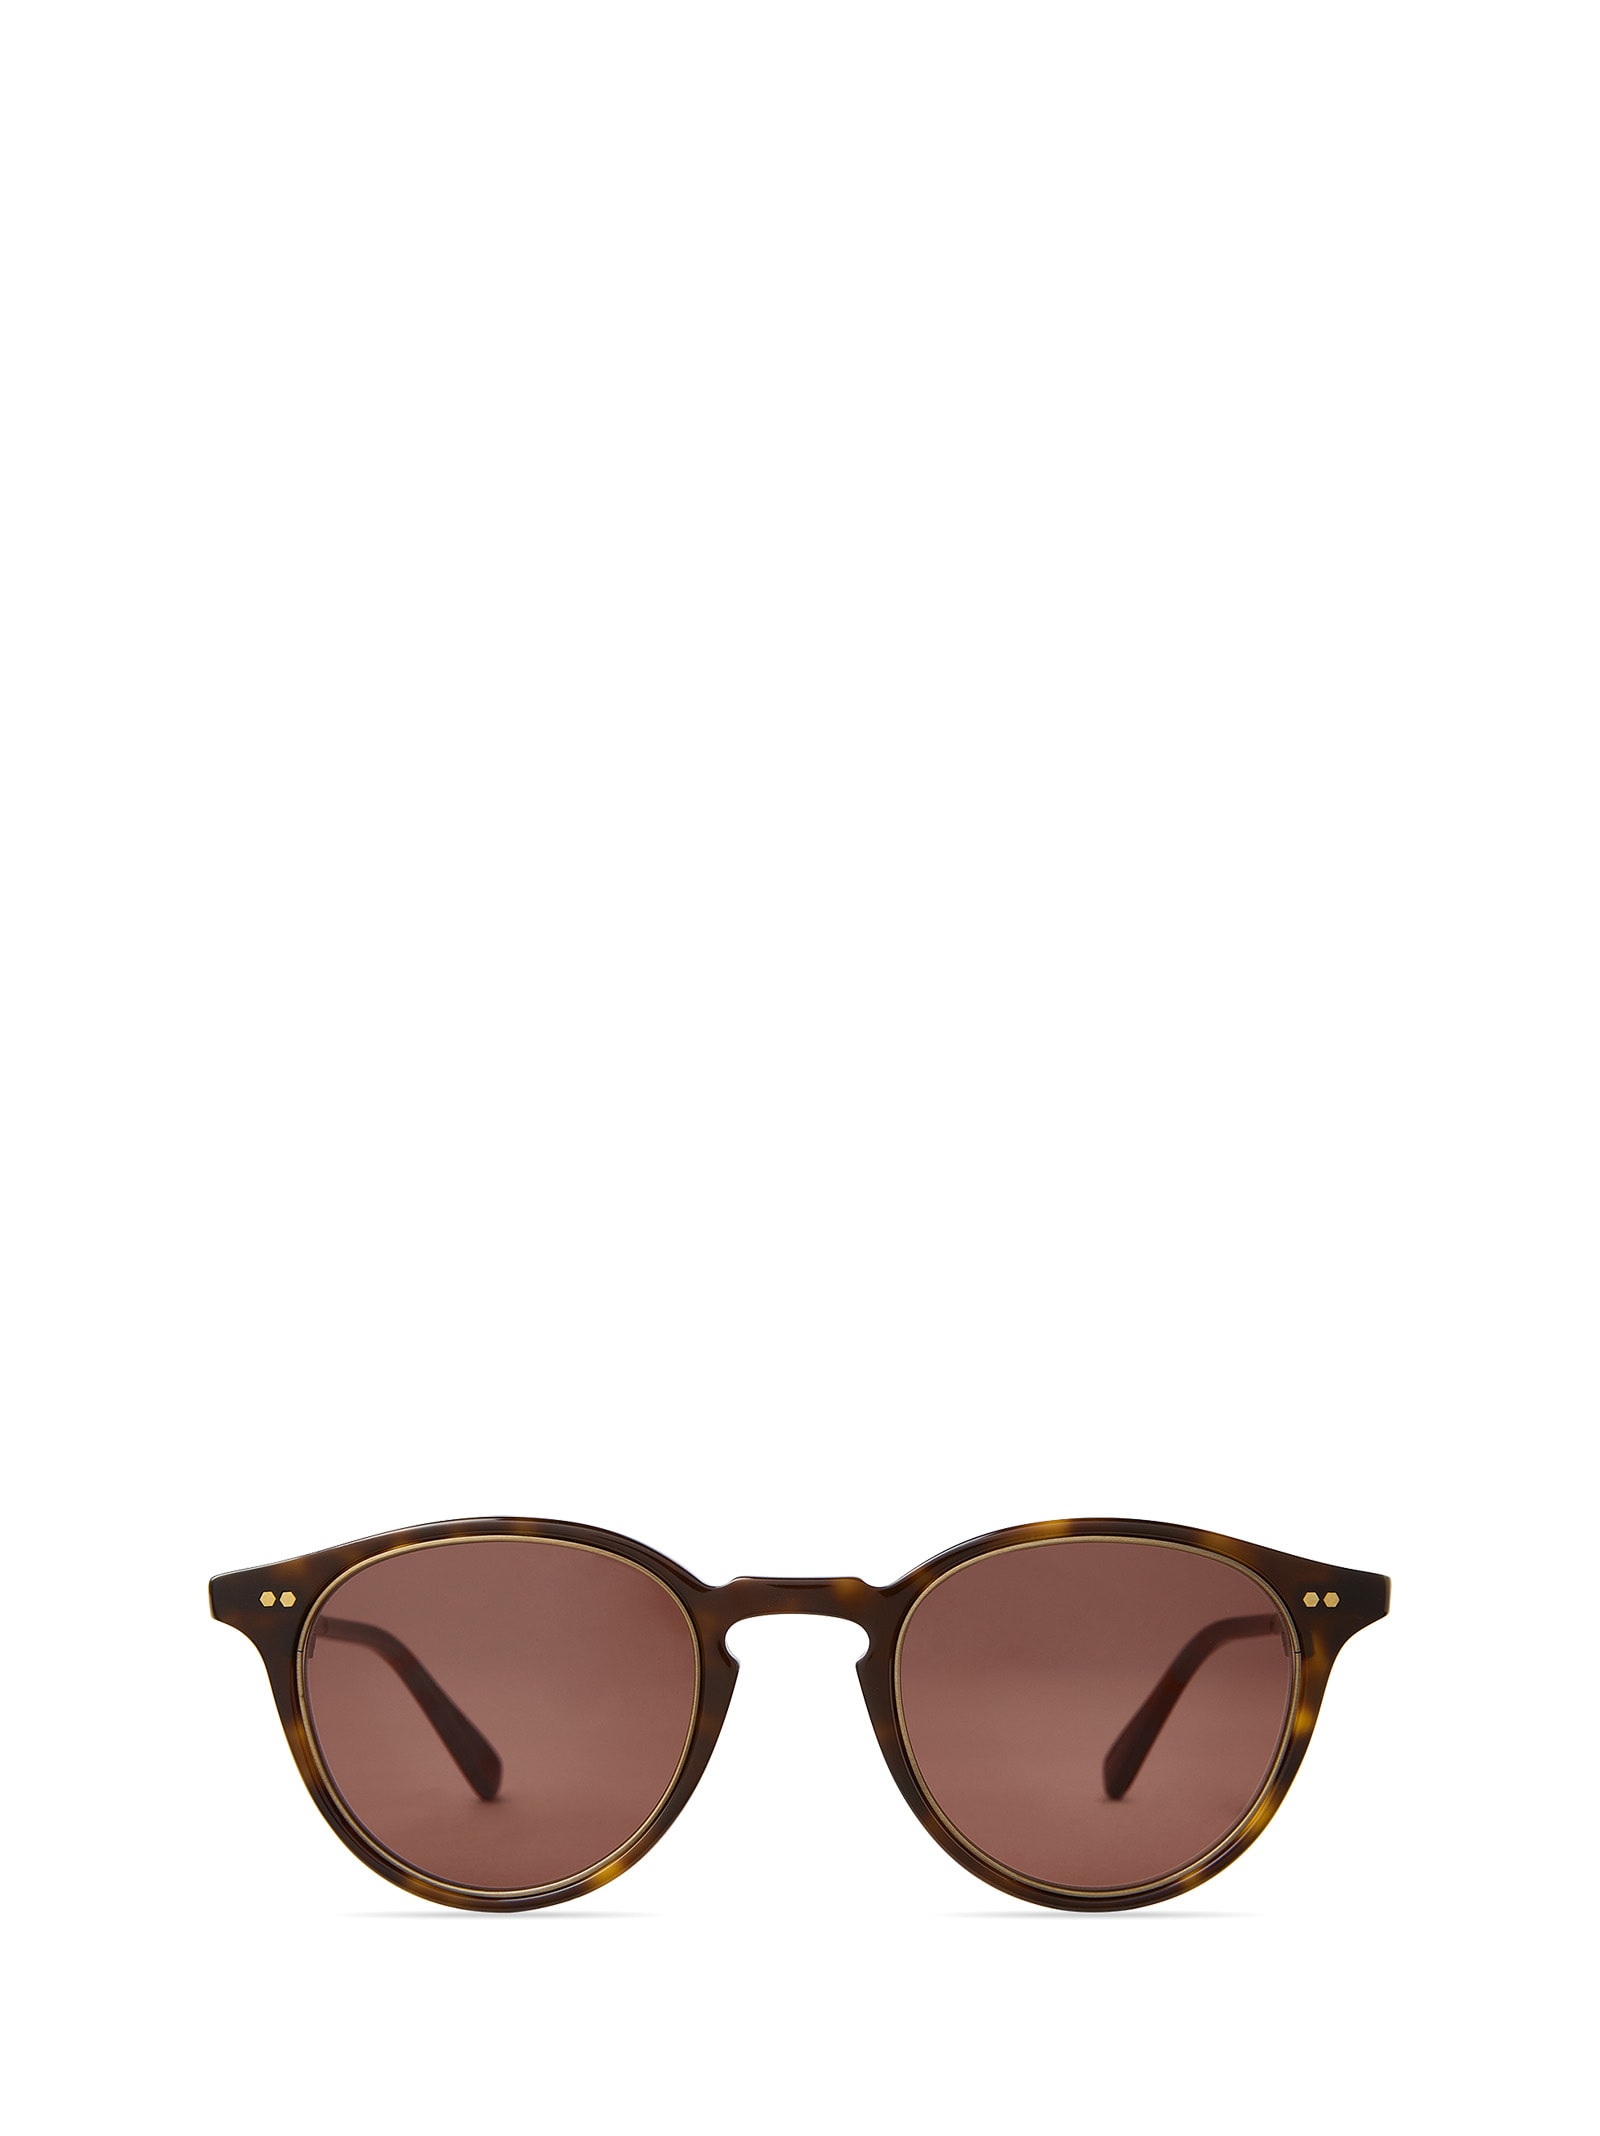 Mr. Leight Marmont Ii S Hickory Tortoise-antique Gold Sunglasses